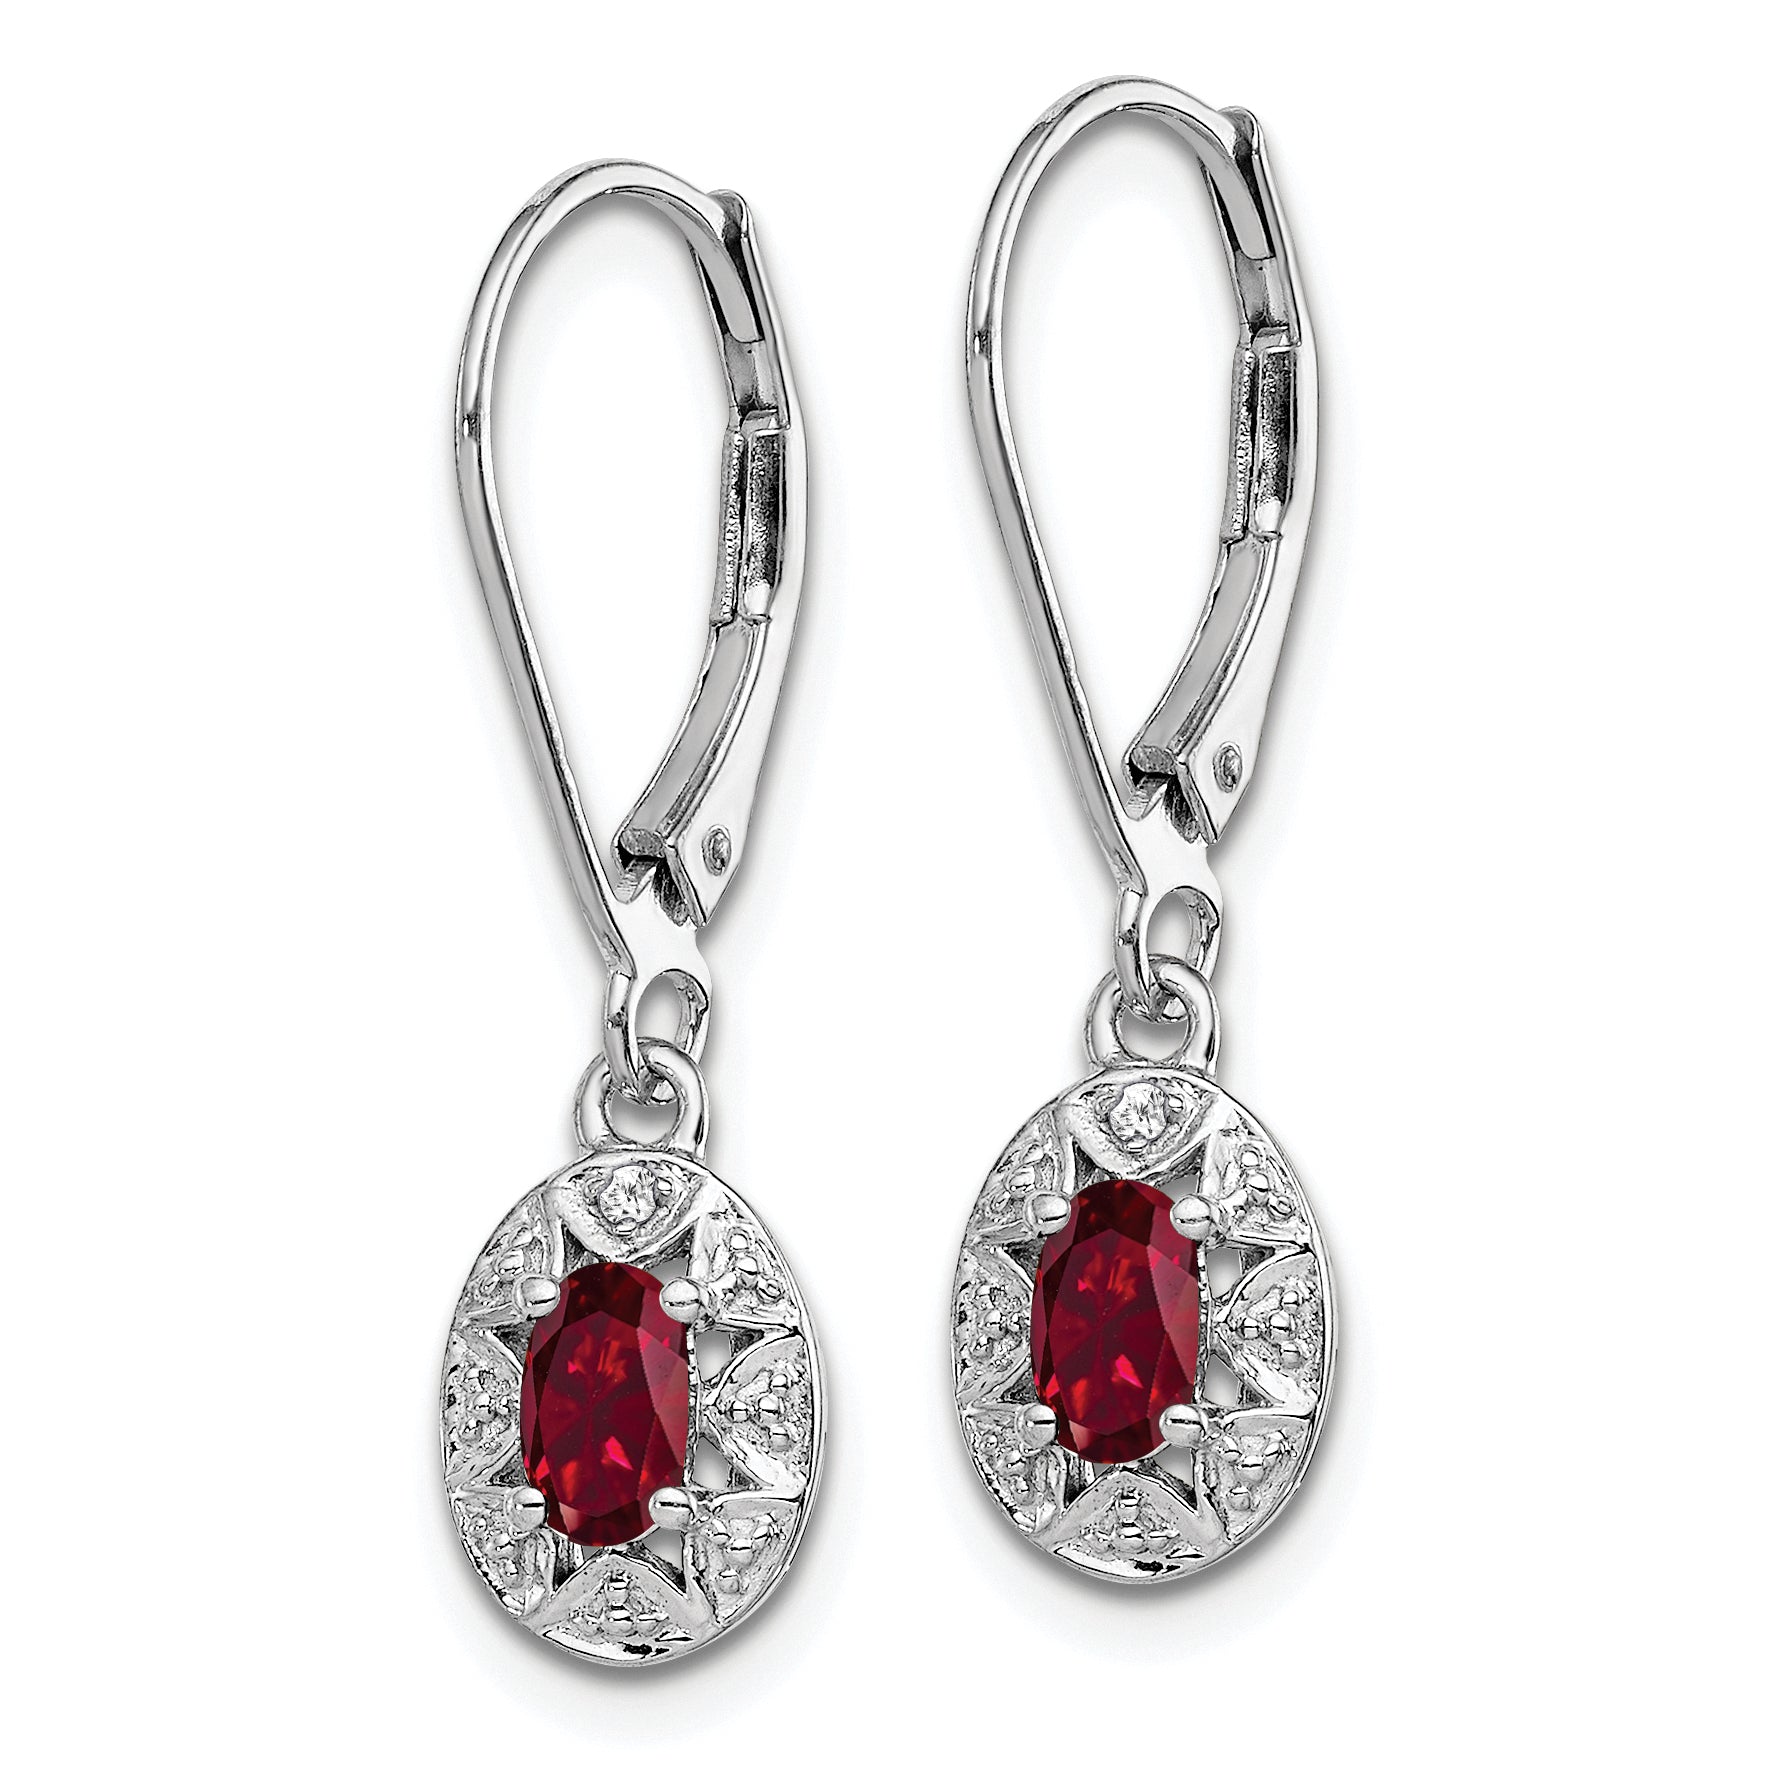 Sterling Silver Rhodium Plated Diamond and Lab Created Ruby Dangle Leverback Earrings